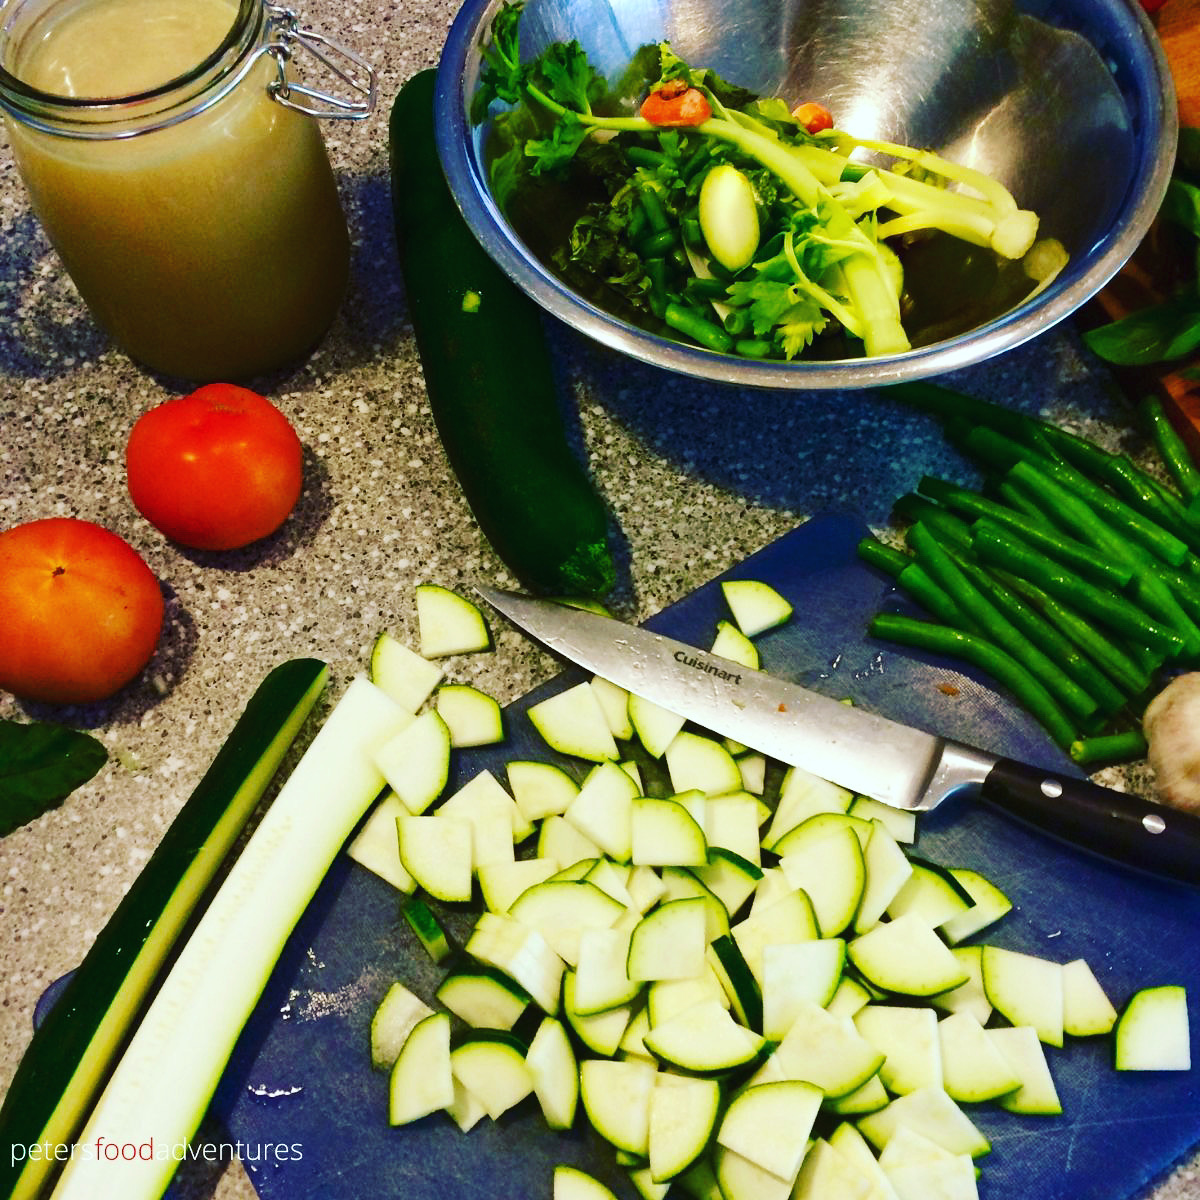 Chopping vegetables for Minestrone